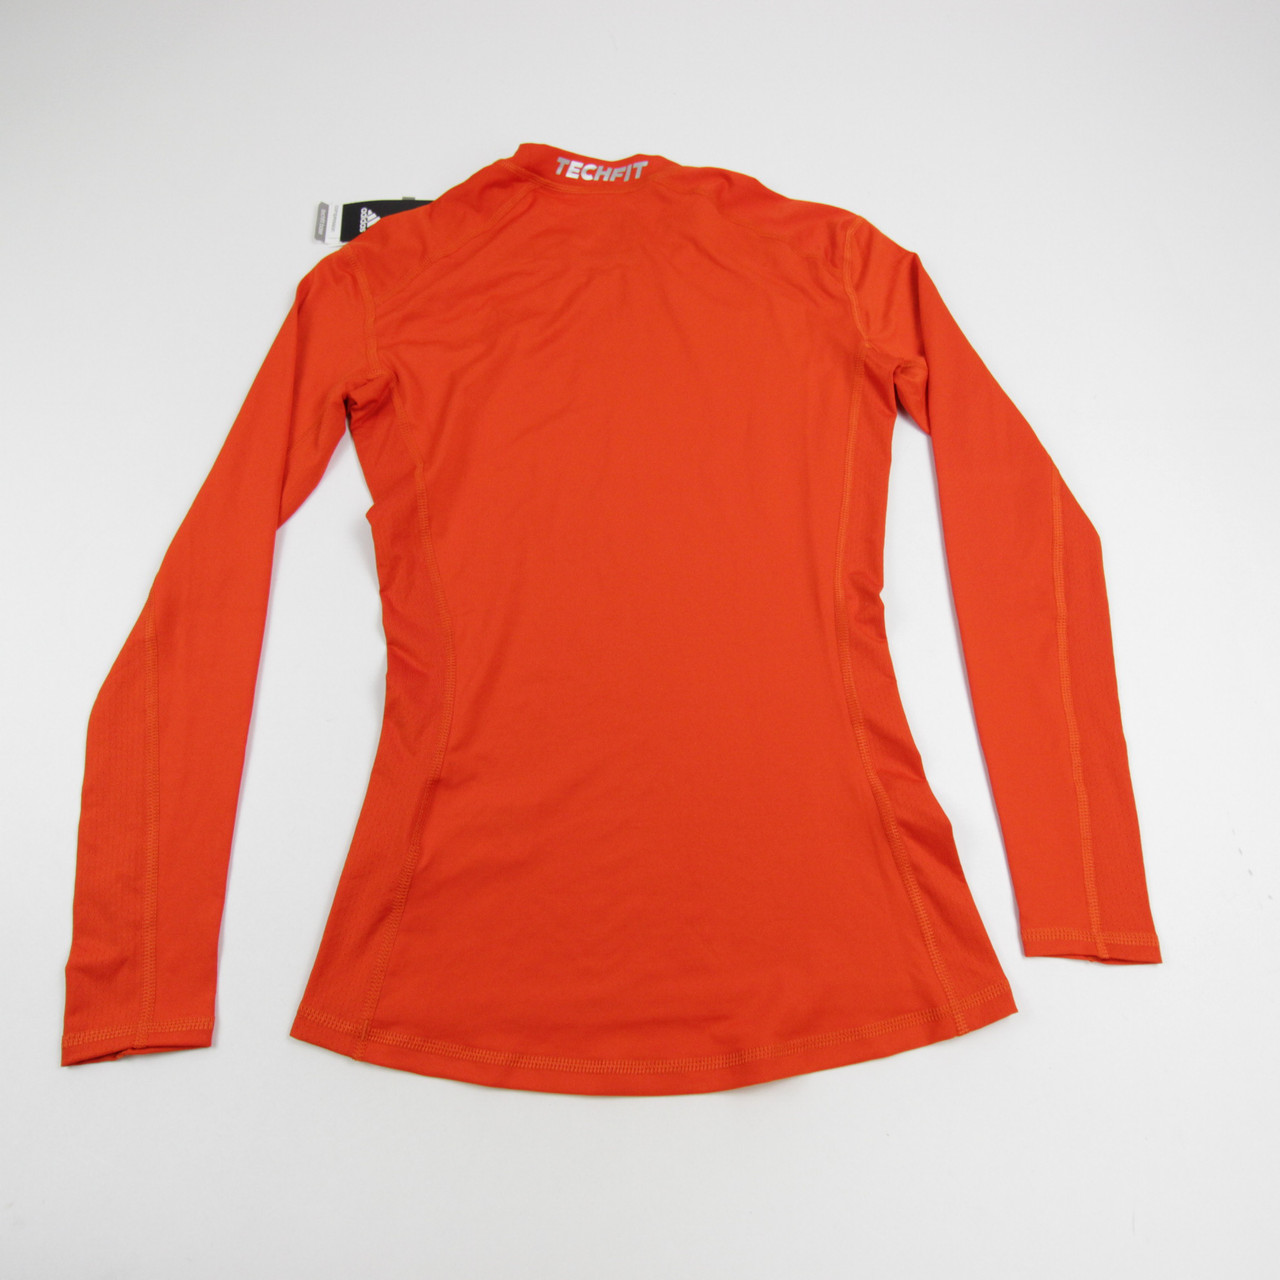 adidas Techfit Compression Top Women's Orange New with Tags S 63